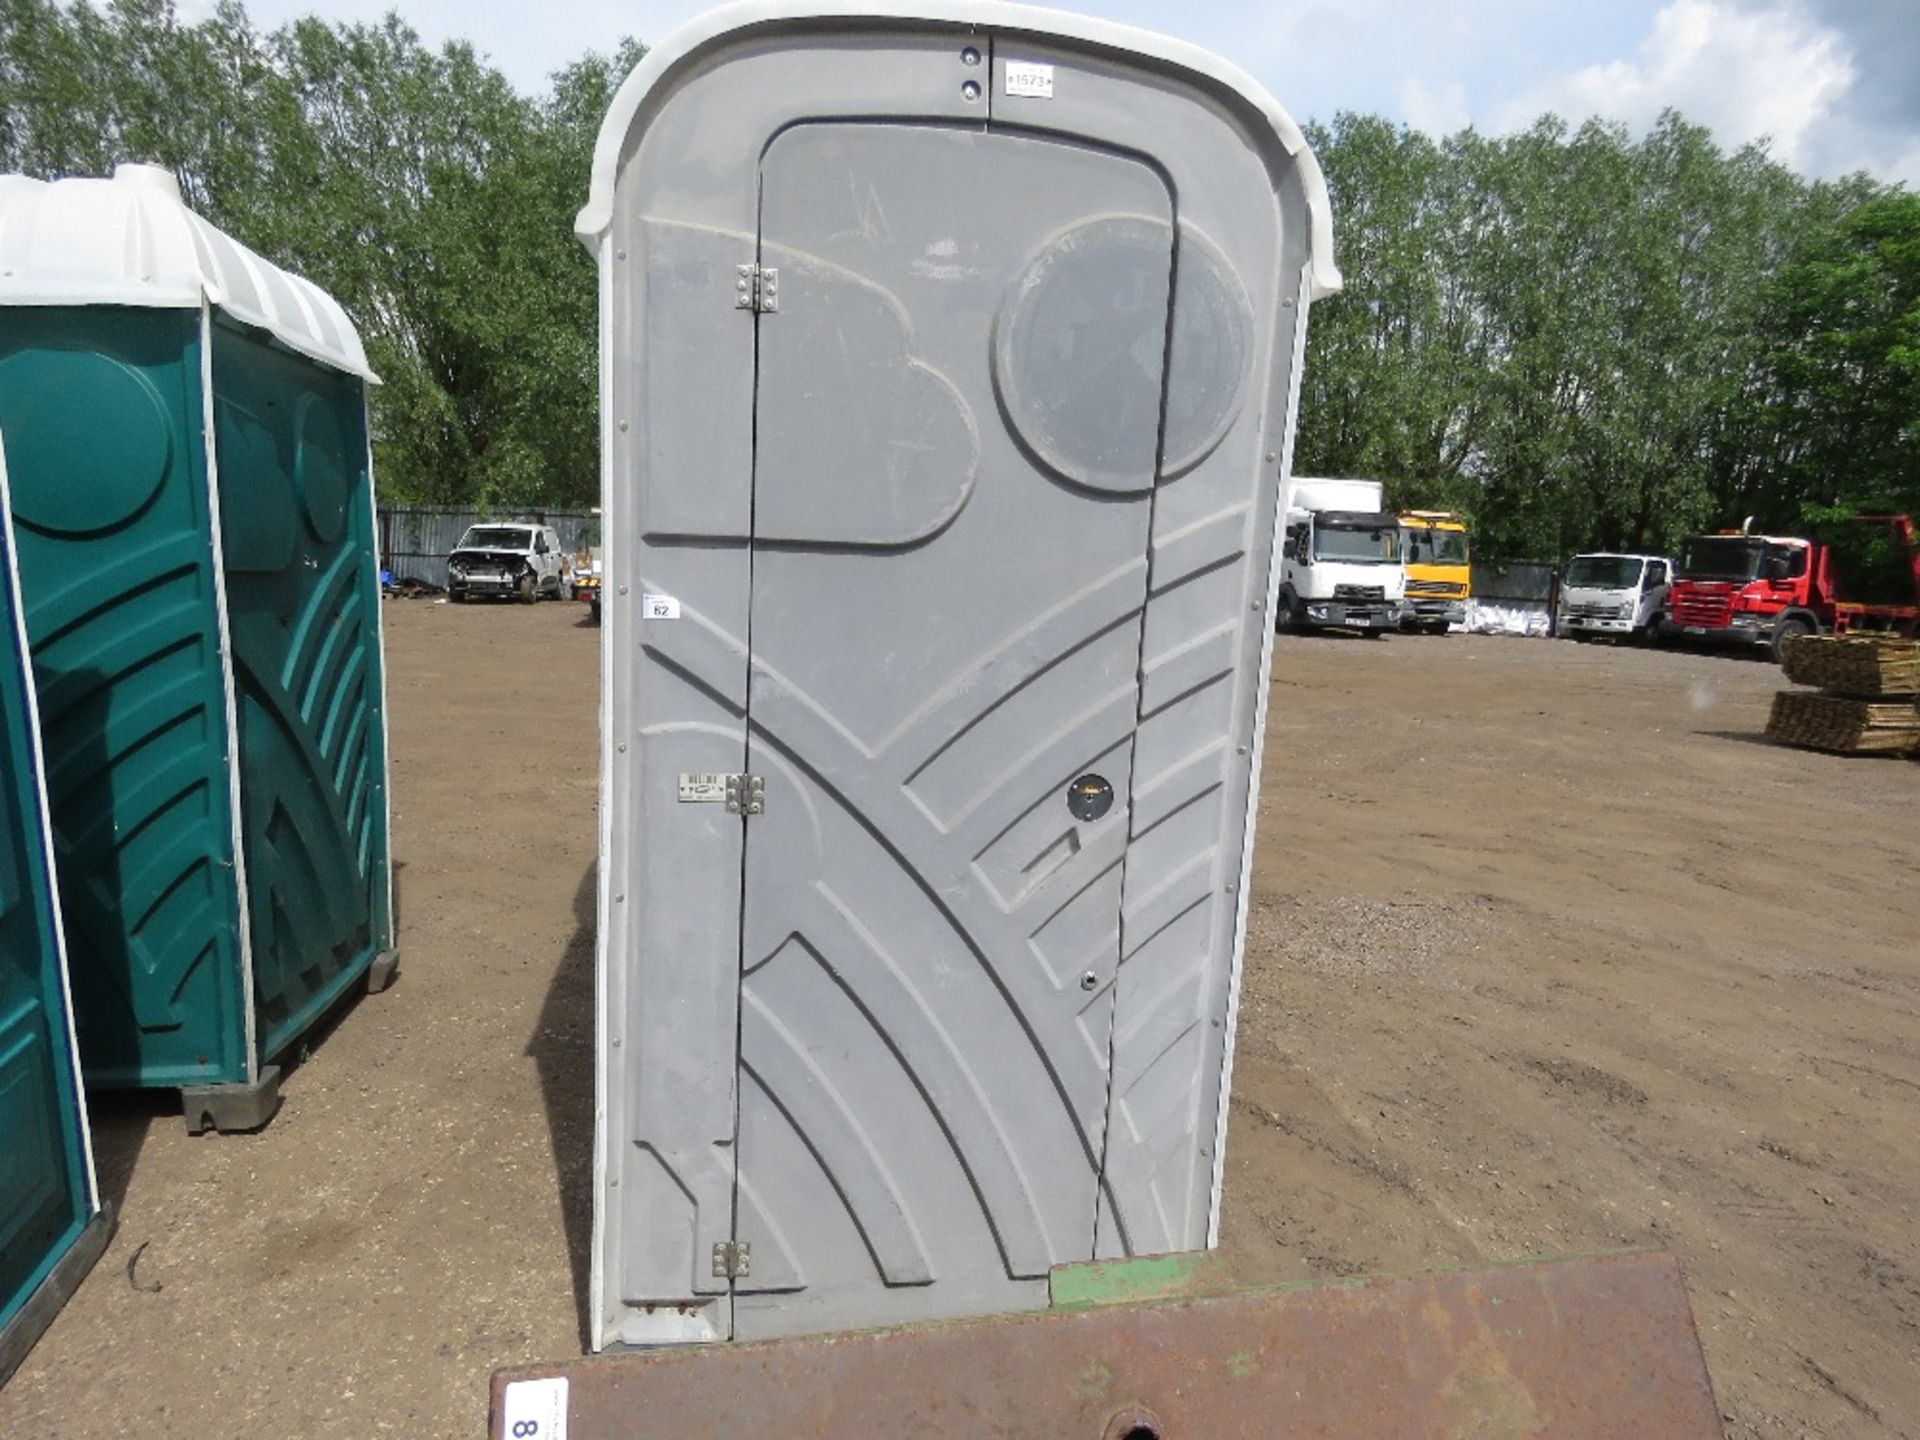 PORTABLE SITE / EVENTS TOILET, DIRECT FROM EVENTS COMPANY DUE TO ONGOING REPLACEMENT PRGRAMME. - Bild 2 aus 4